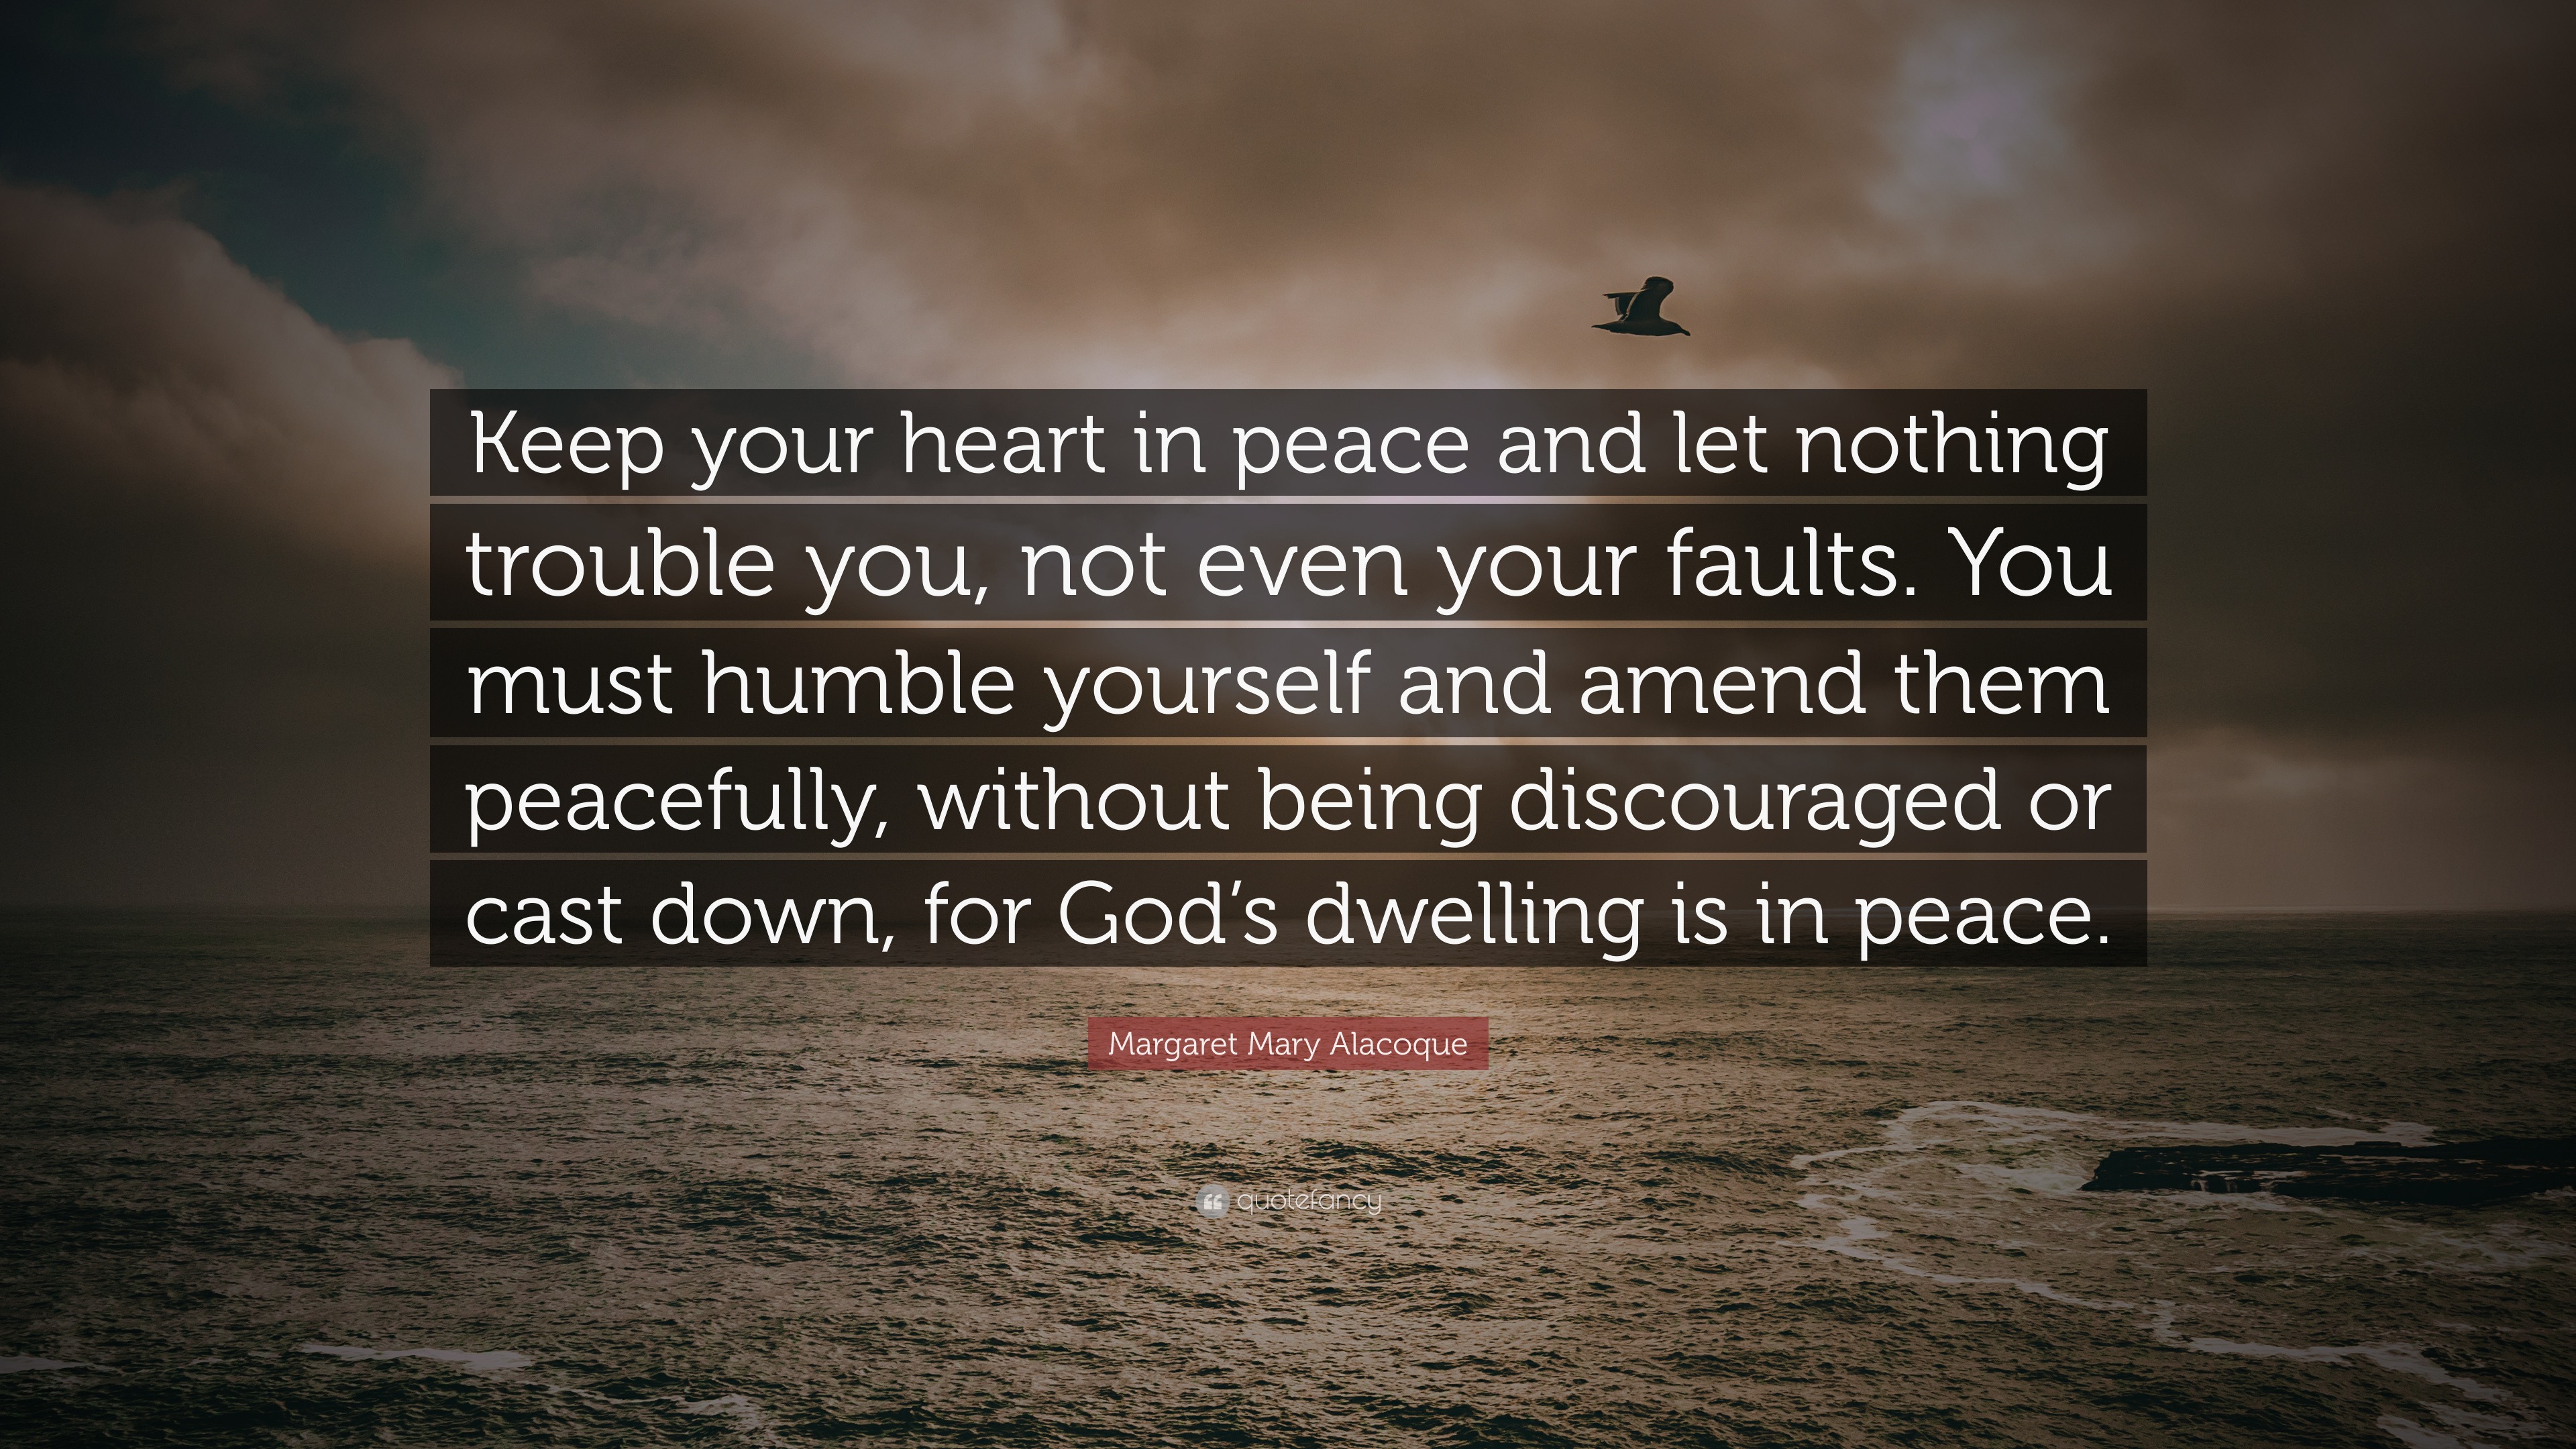 Margaret Mary Alacoque Quote: “Keep your heart in peace and let